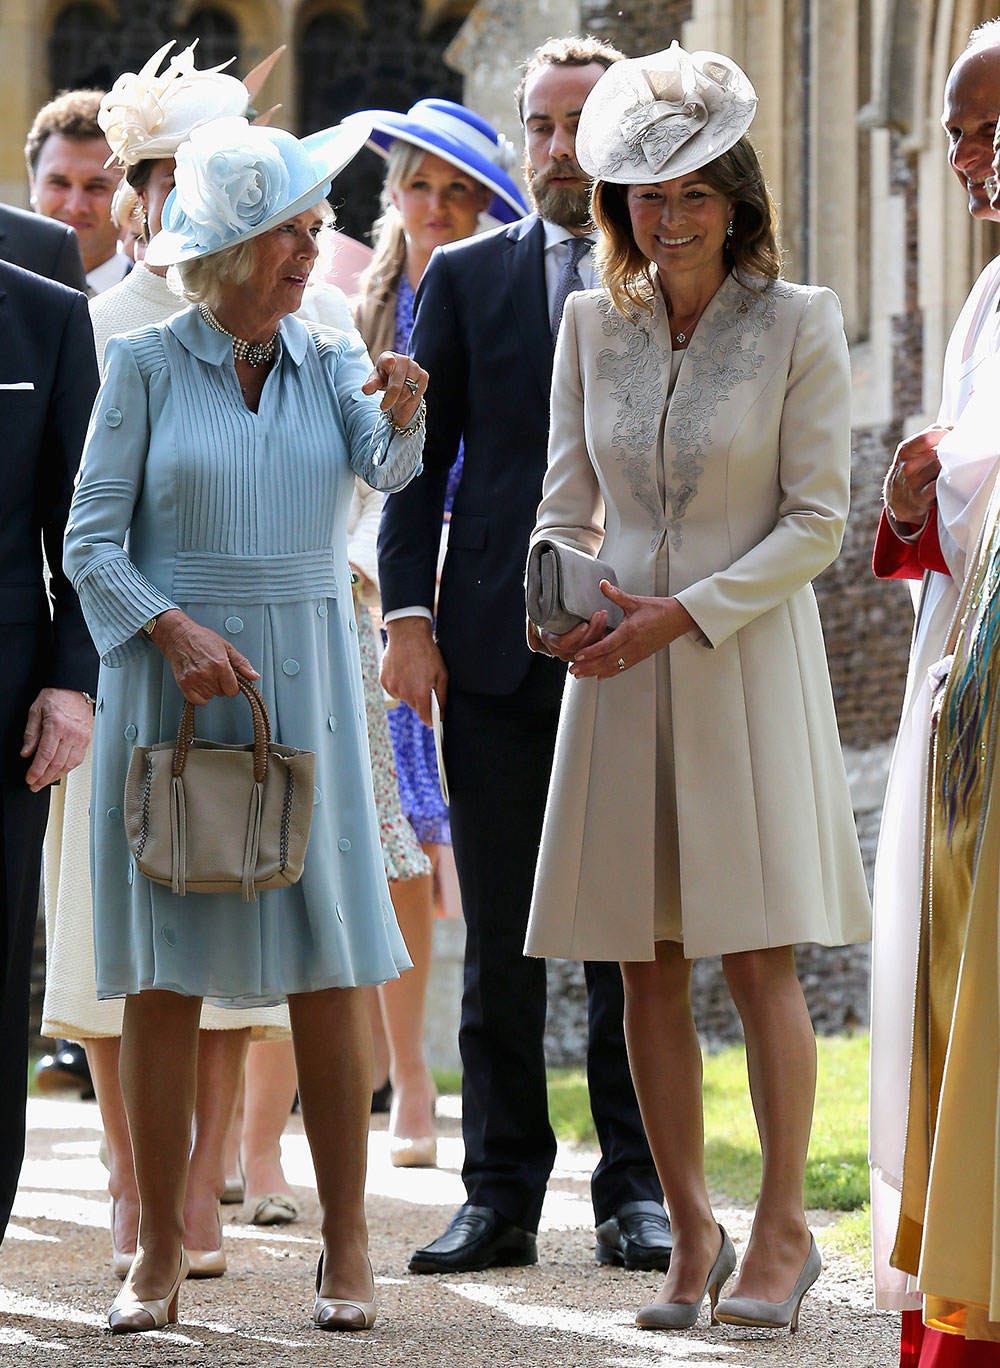 Camilla, Duchess of Cornwall wears a light blue long-sleeved dress with a matching wide-brimmed hat and nude accessories while Kate’s mother Carole Middleton wears a cream-coloured coat with grey embroidery with a matching fascinator.